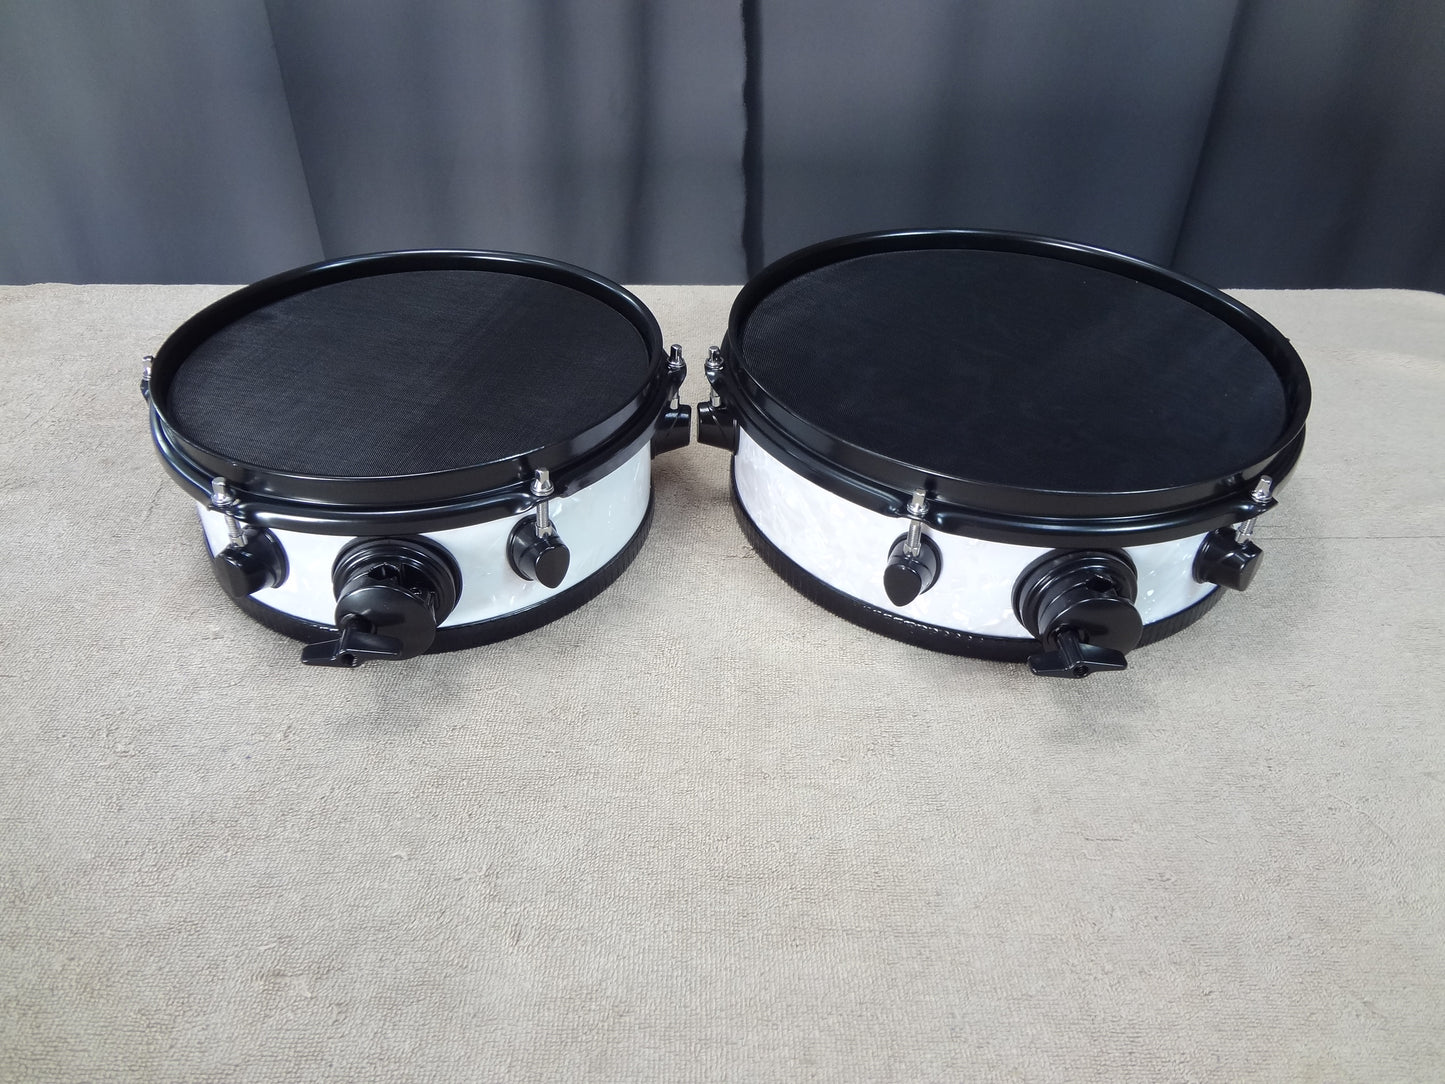 NEW 4 PIECE ELECTRONIC DRUM SHELL PACK - WHITE PEARL